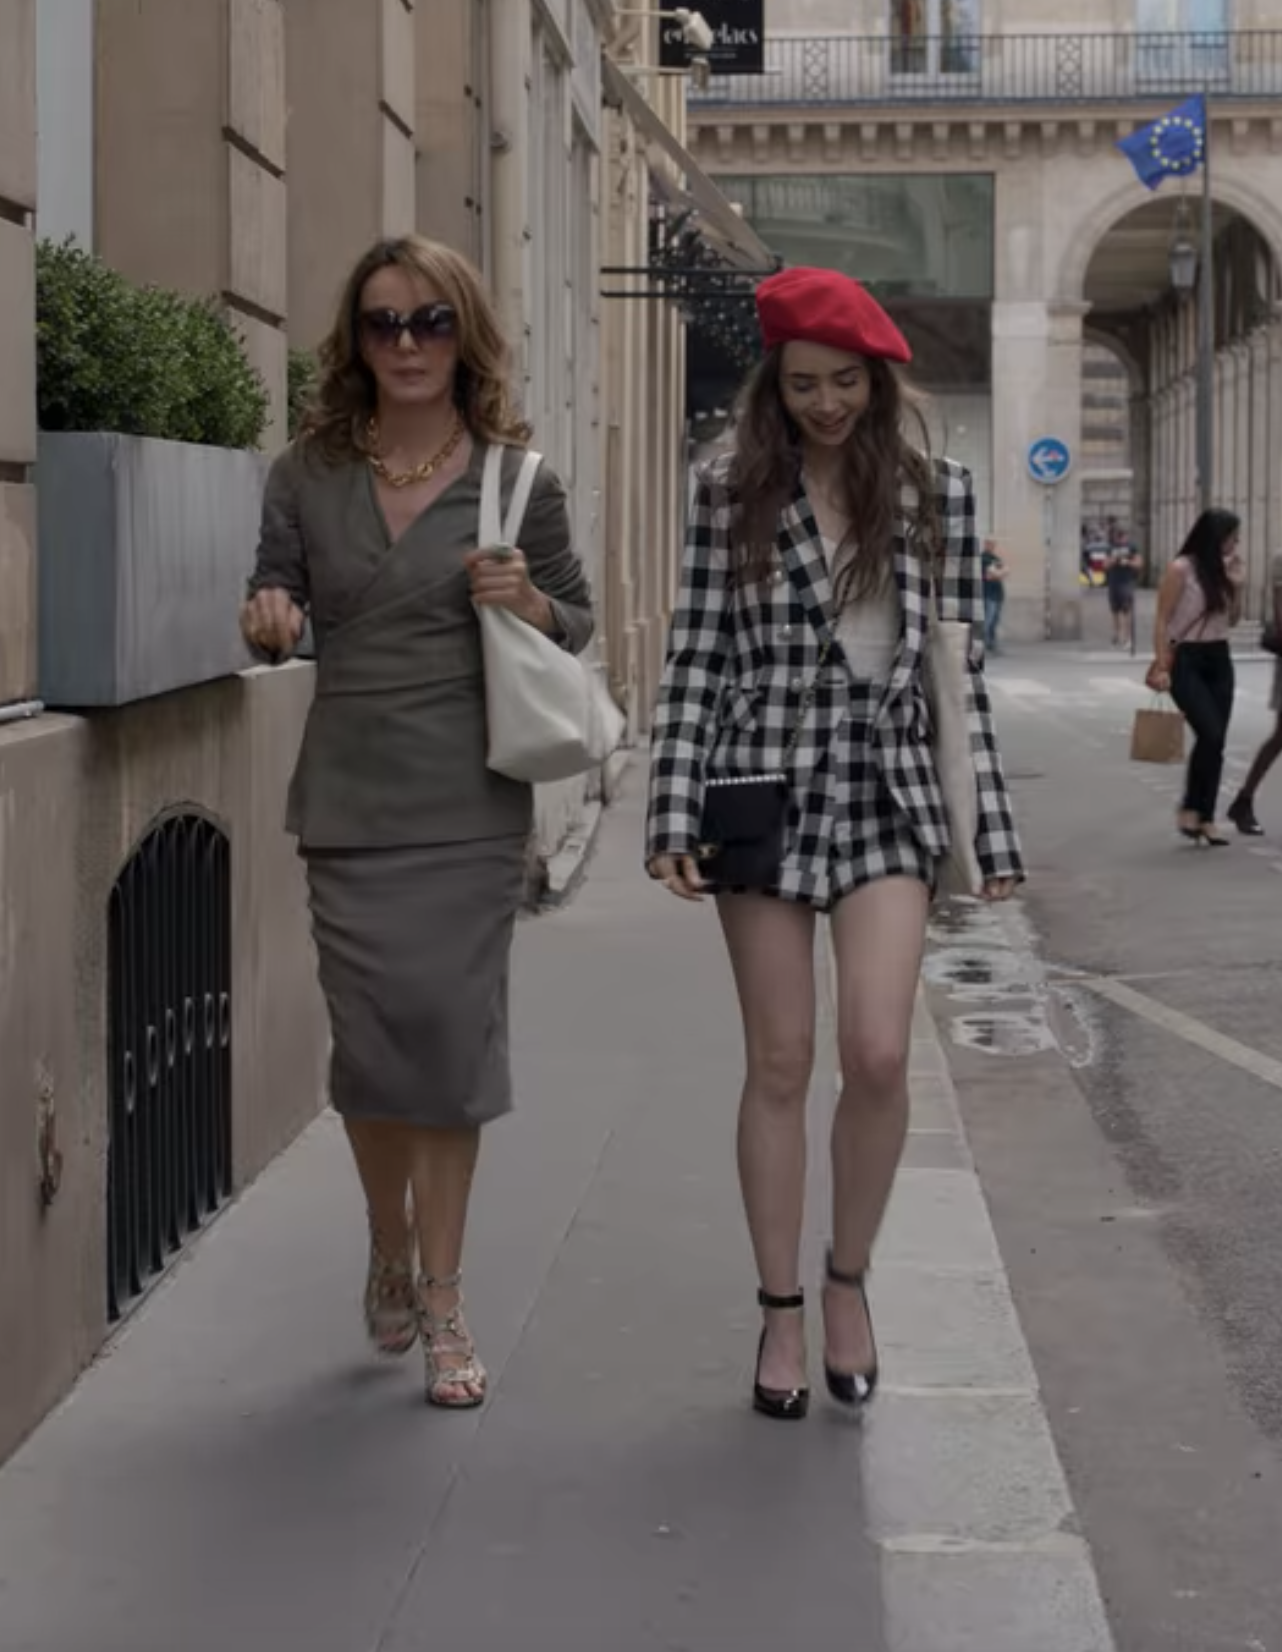 Emily and Sylvie walk down a street; Emily is dressed in a matching black and white gingham blazer/short set with a red beret and black heels